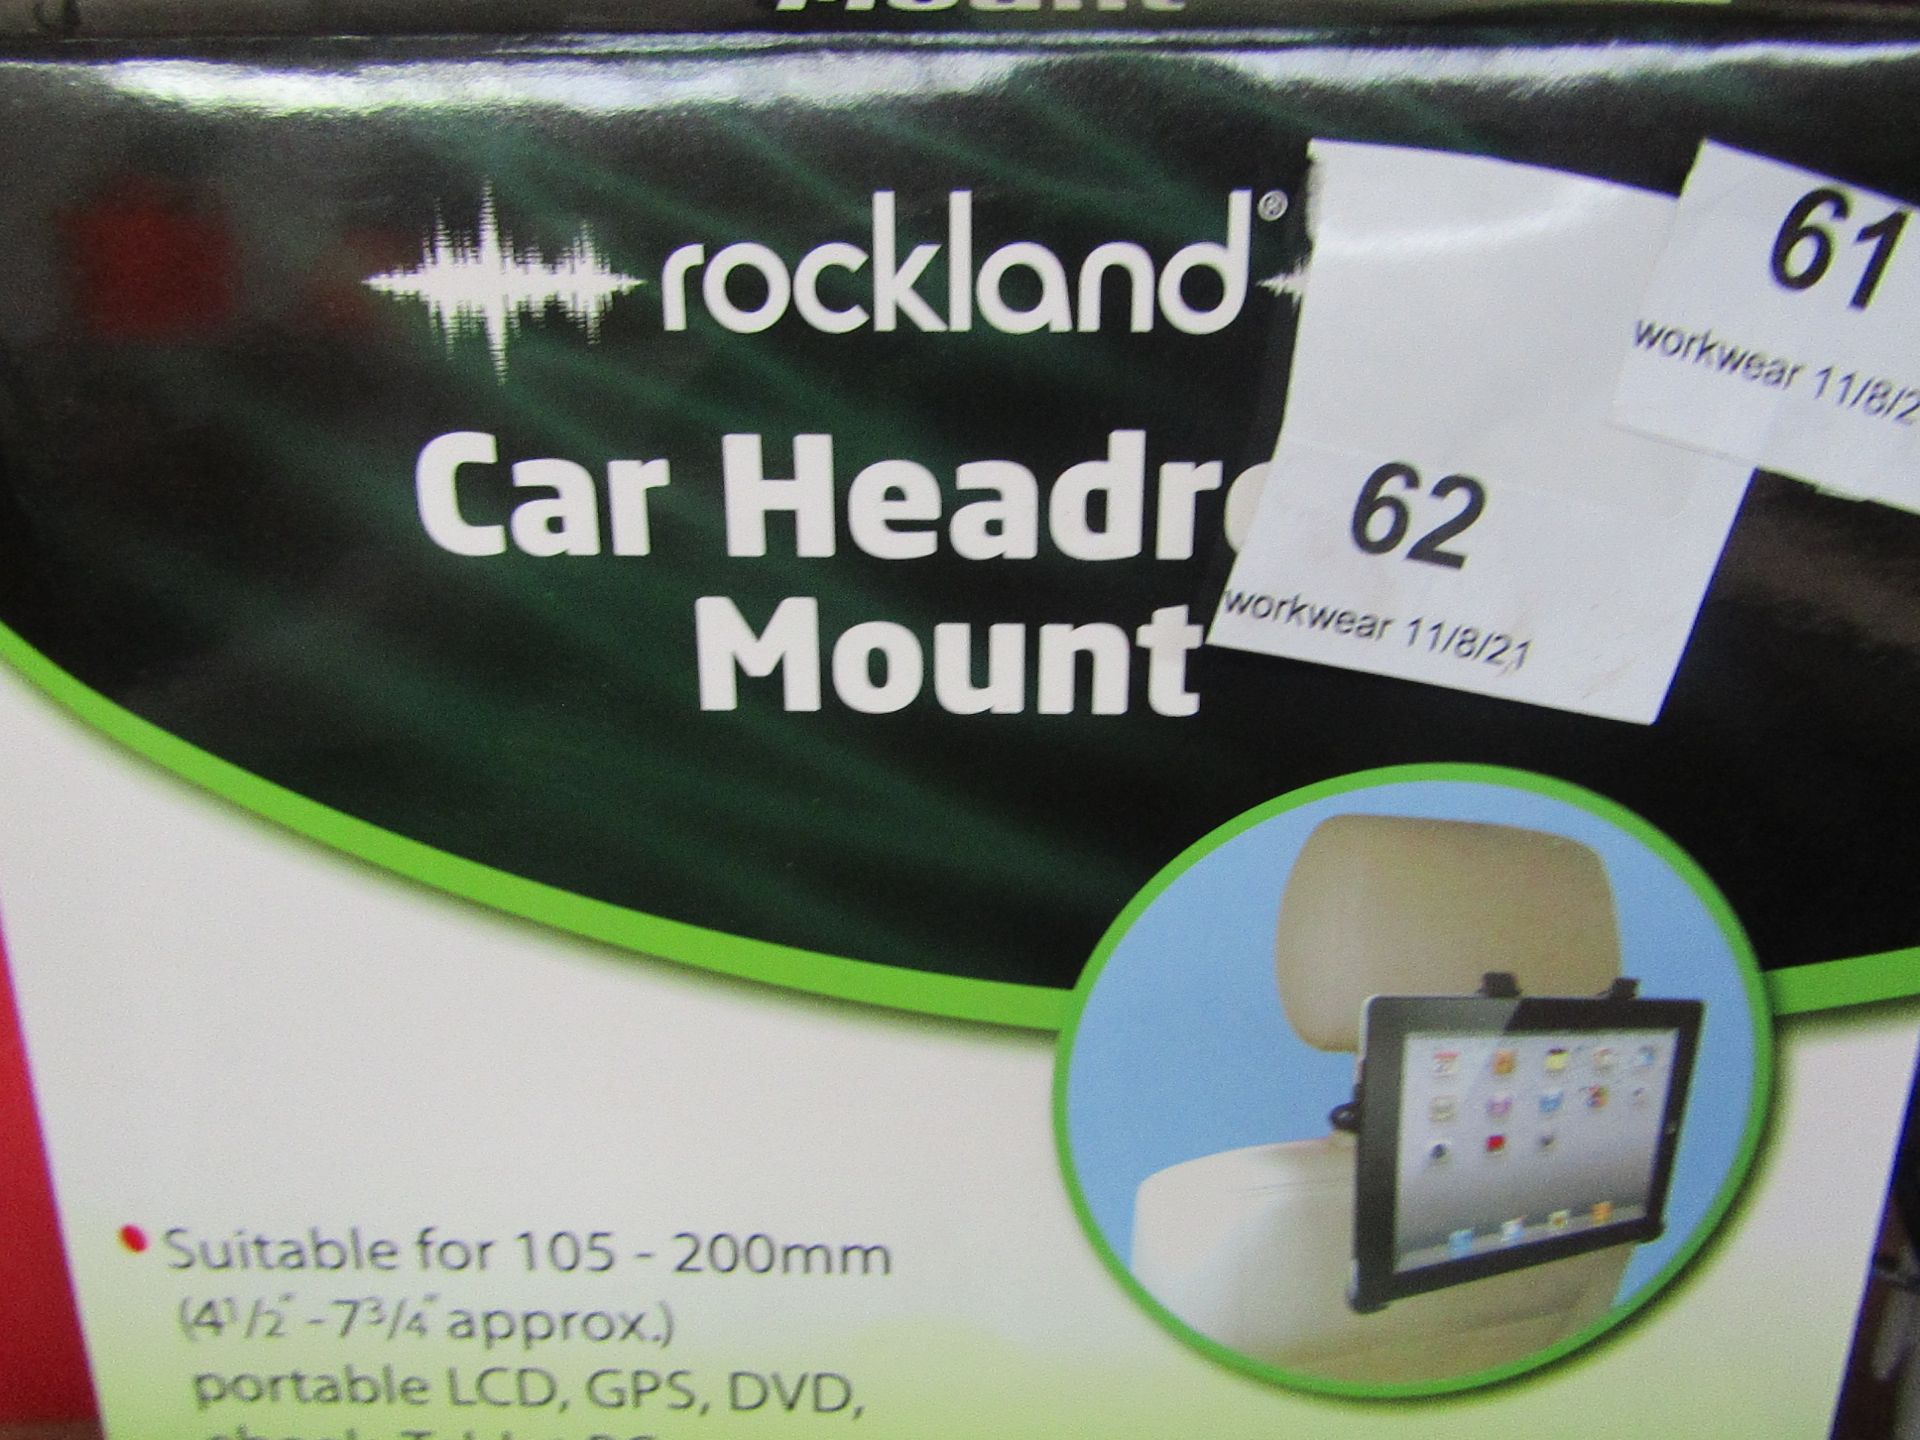 4x Rockland - Car Headrest Mounts Suitable for Tablets and devices up to 7" - New & Boxed.